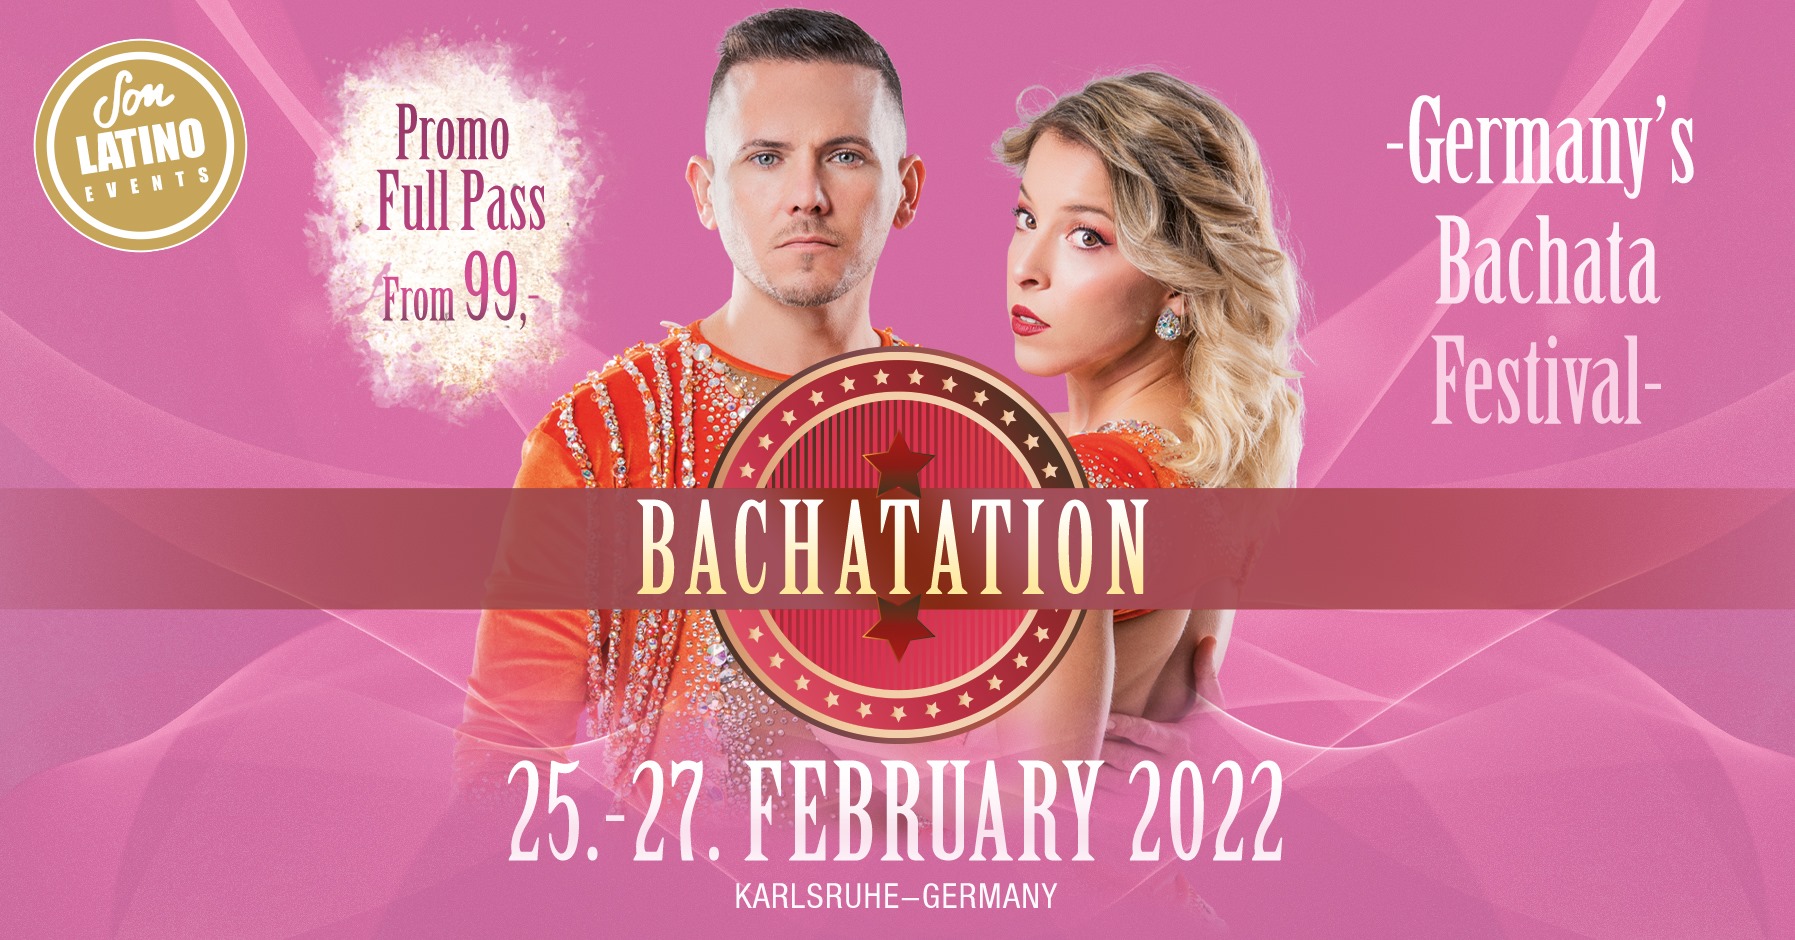 You are currently viewing Bachatation 2022 in Karlsruhe